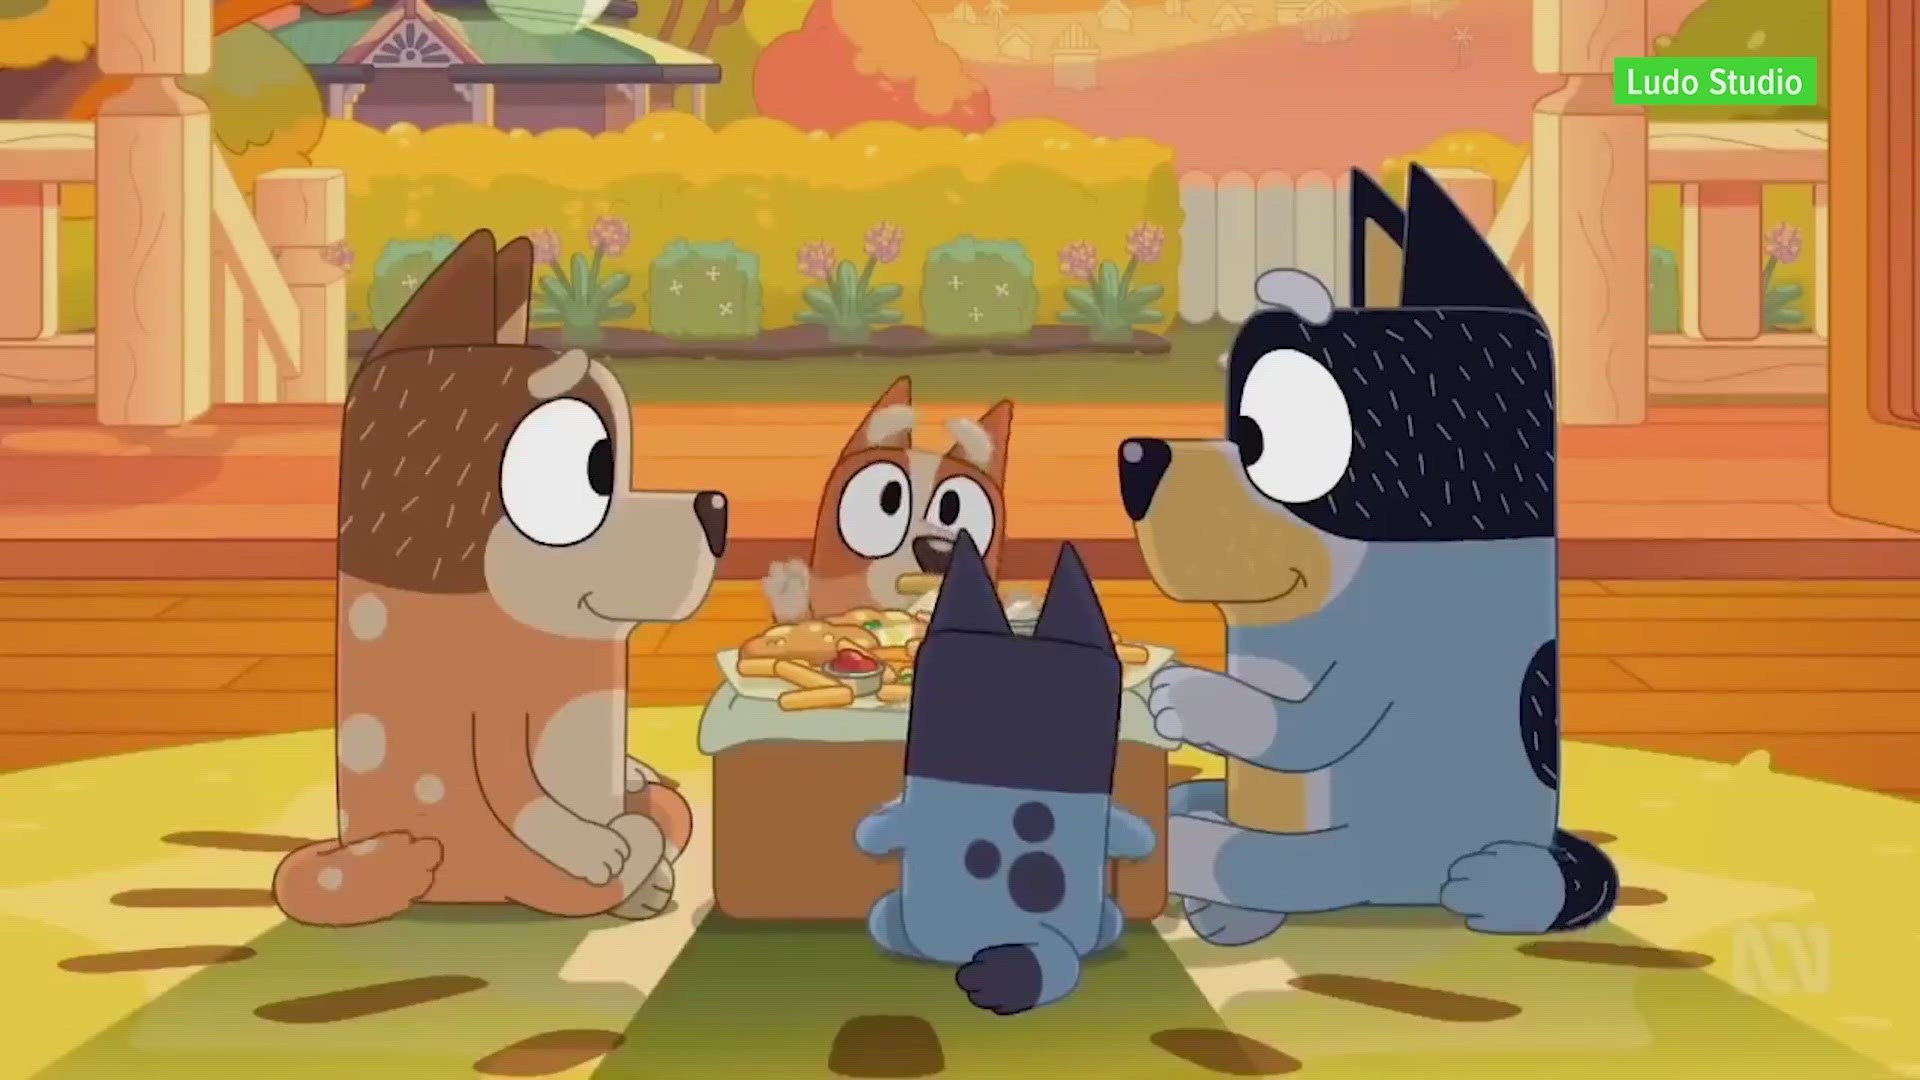 Online rumors fearing the cancellation of "Bluey" prompts the producer to confirm the series' return.